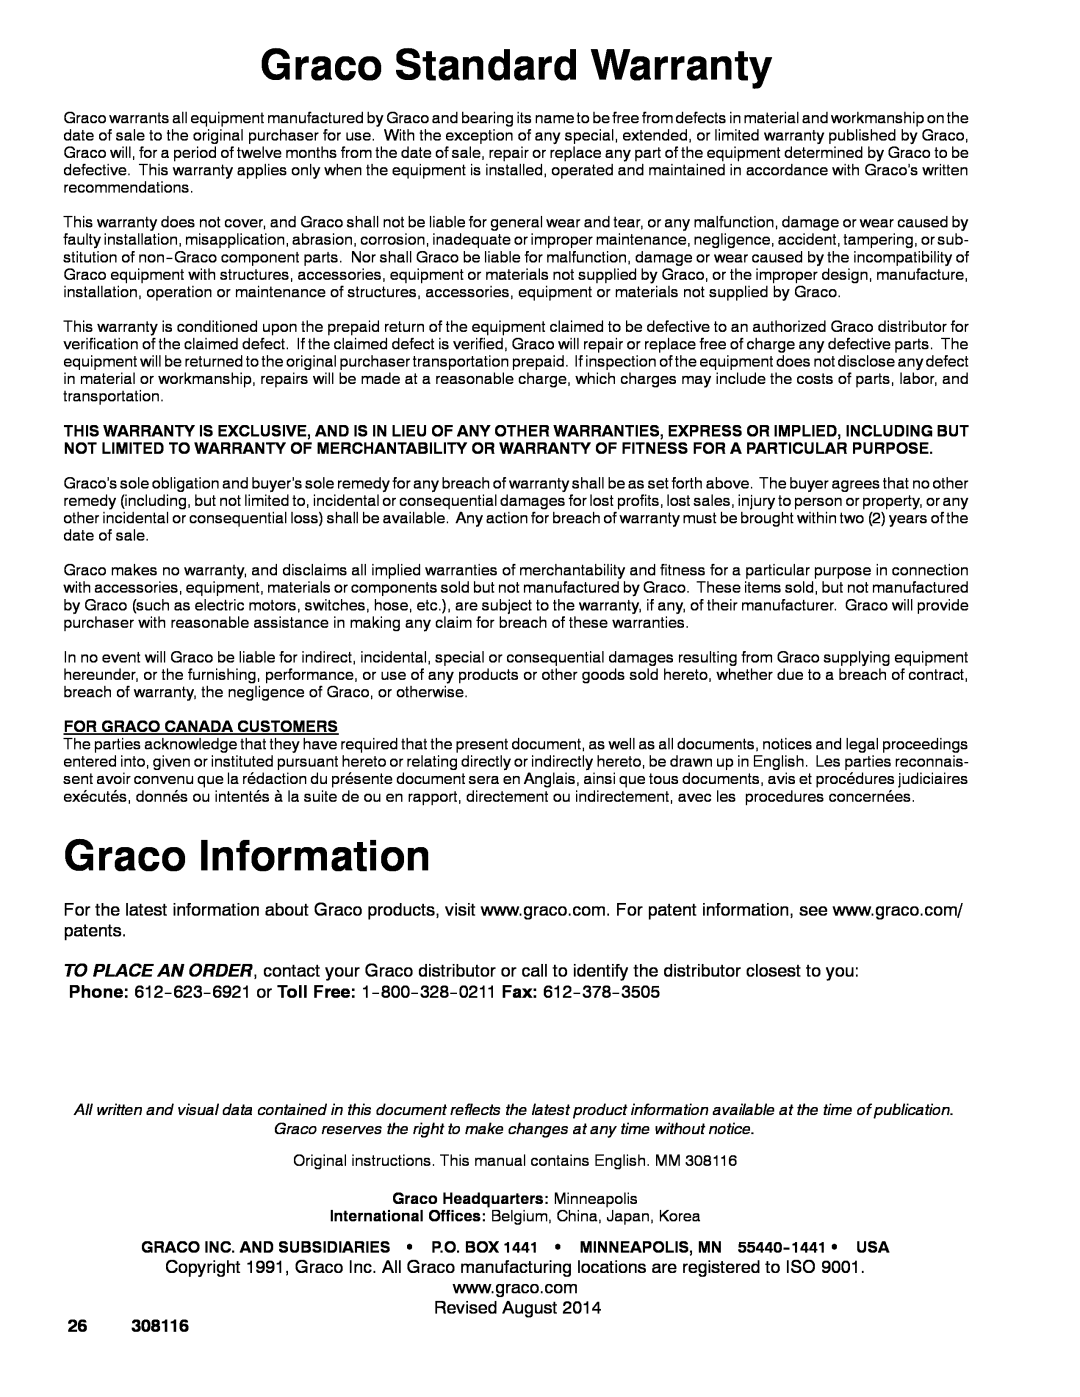 Graco 308116T important safety instructions Graco Standard Warranty, Graco Information 